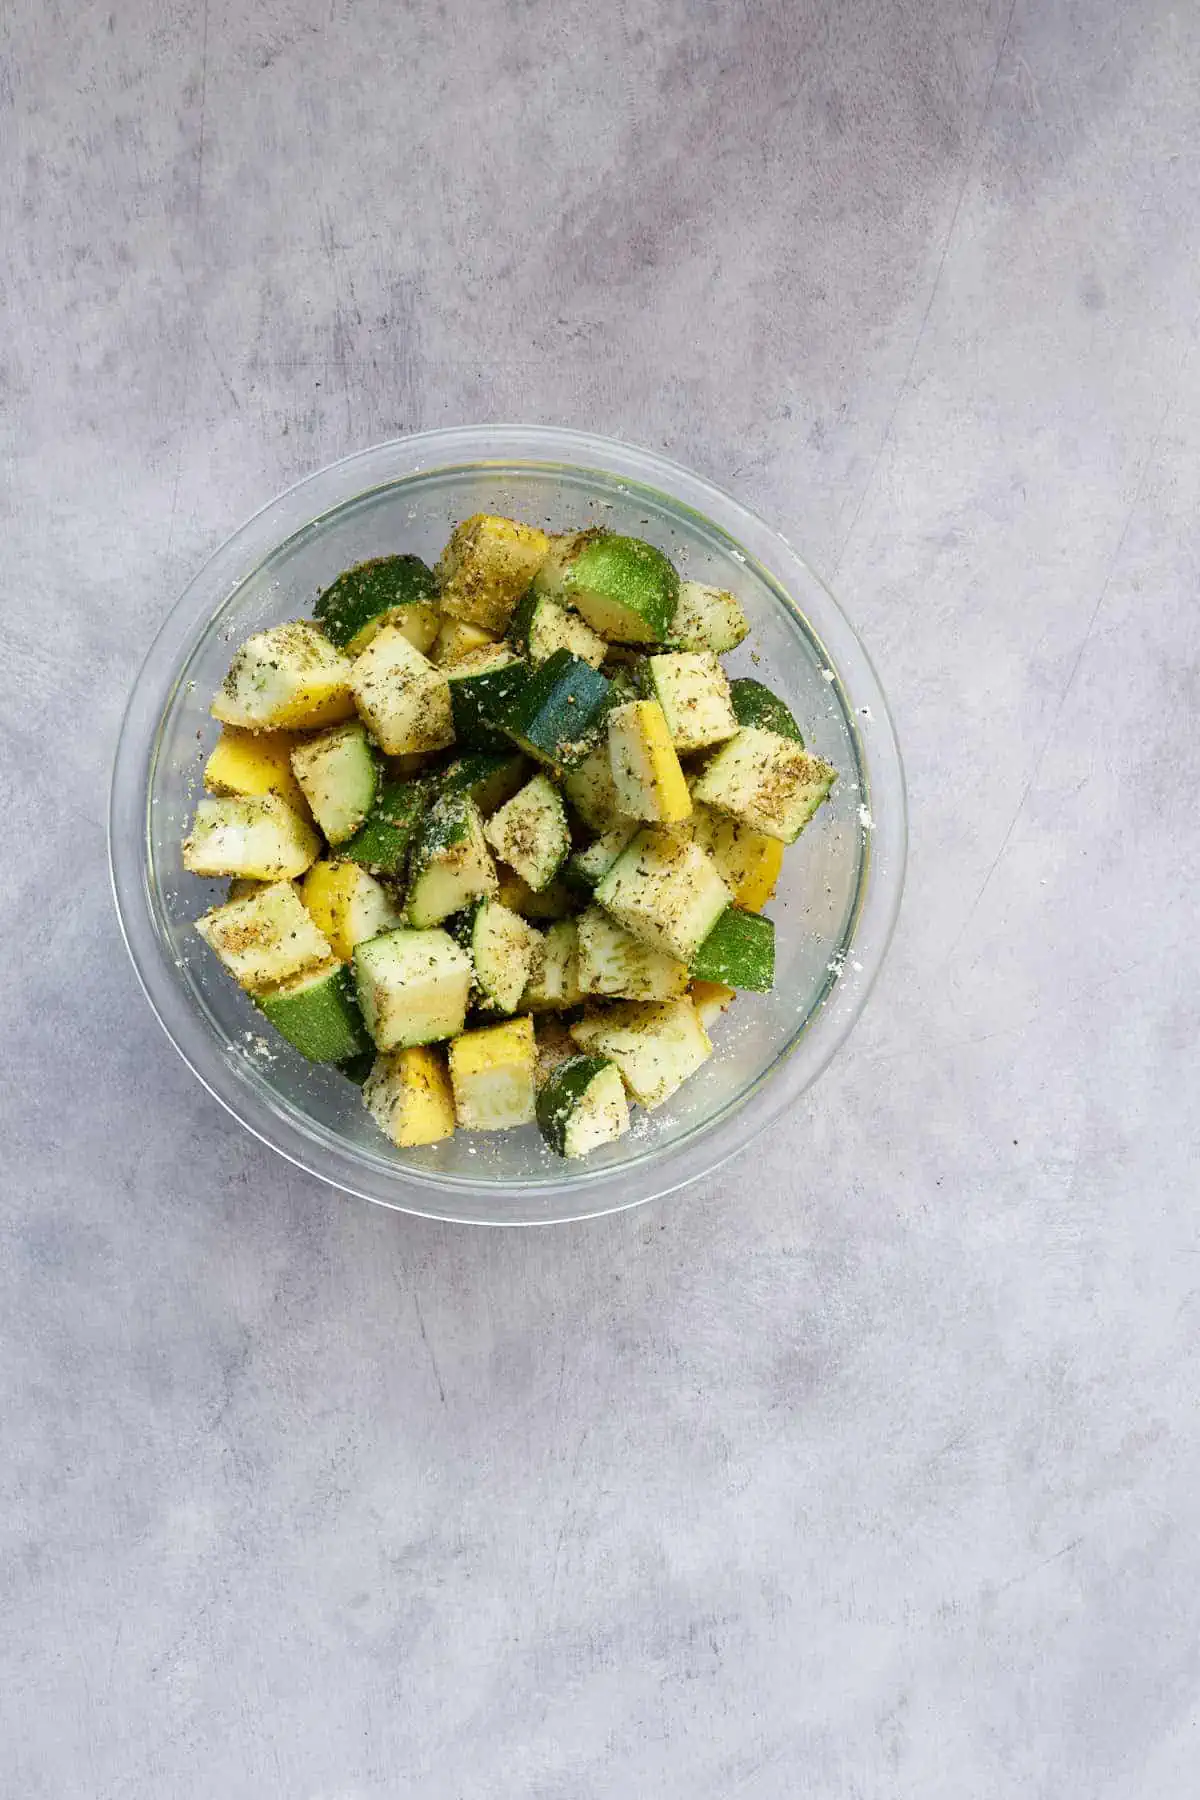 Zucchini and yellow squash in a bowl mixed with the seasoning.